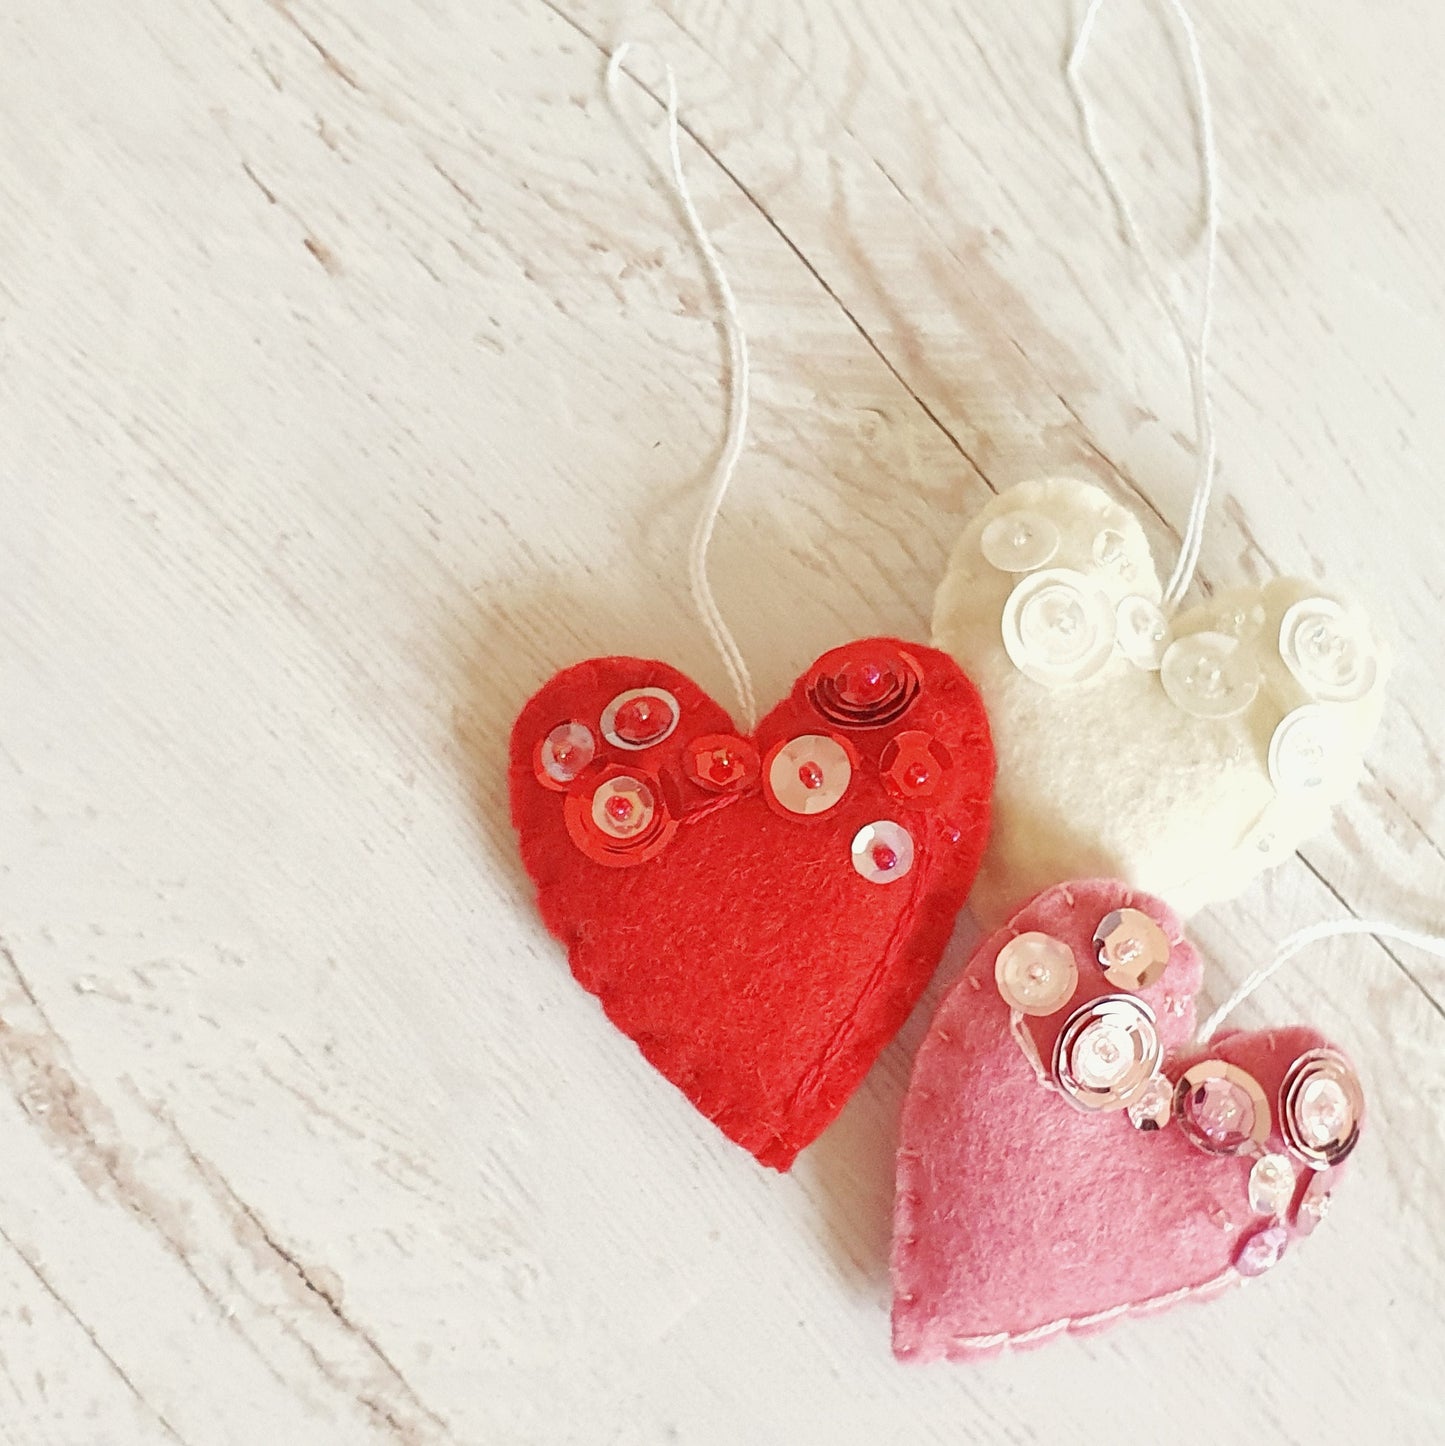 Heart ornament - felt ornaments with sequins - Valentine's day decoration